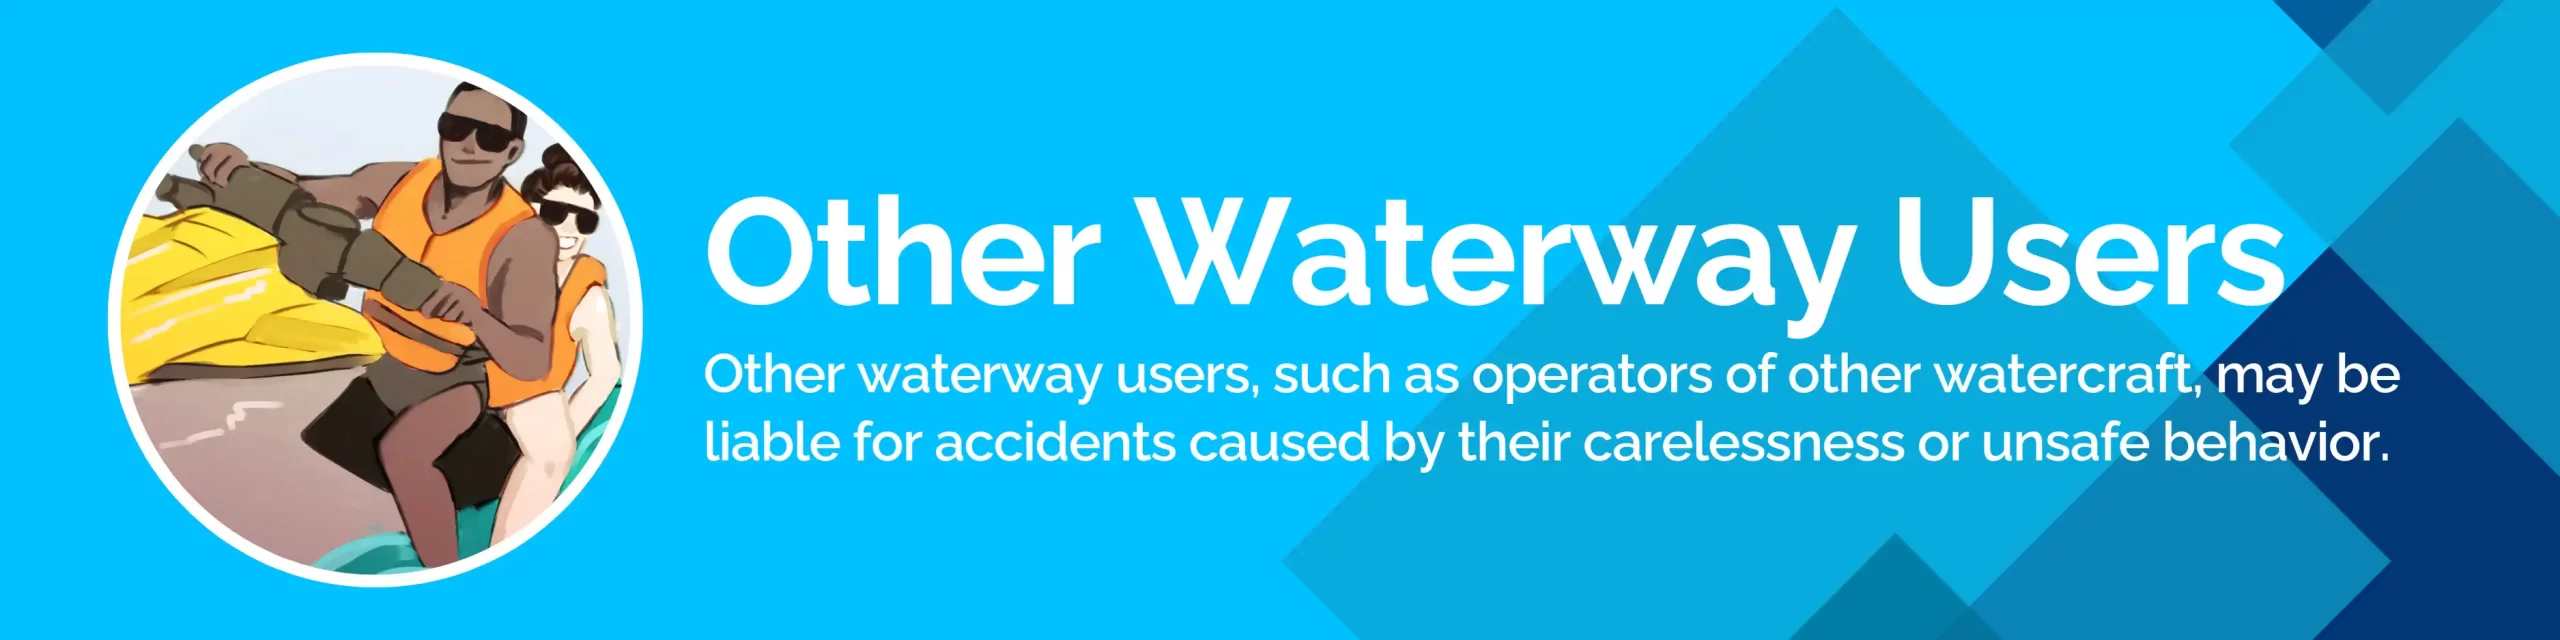 Image detailing how other waterway users may be responsible for causing a boating accident, accompanied by an illustration of a person operating a personal watercraft